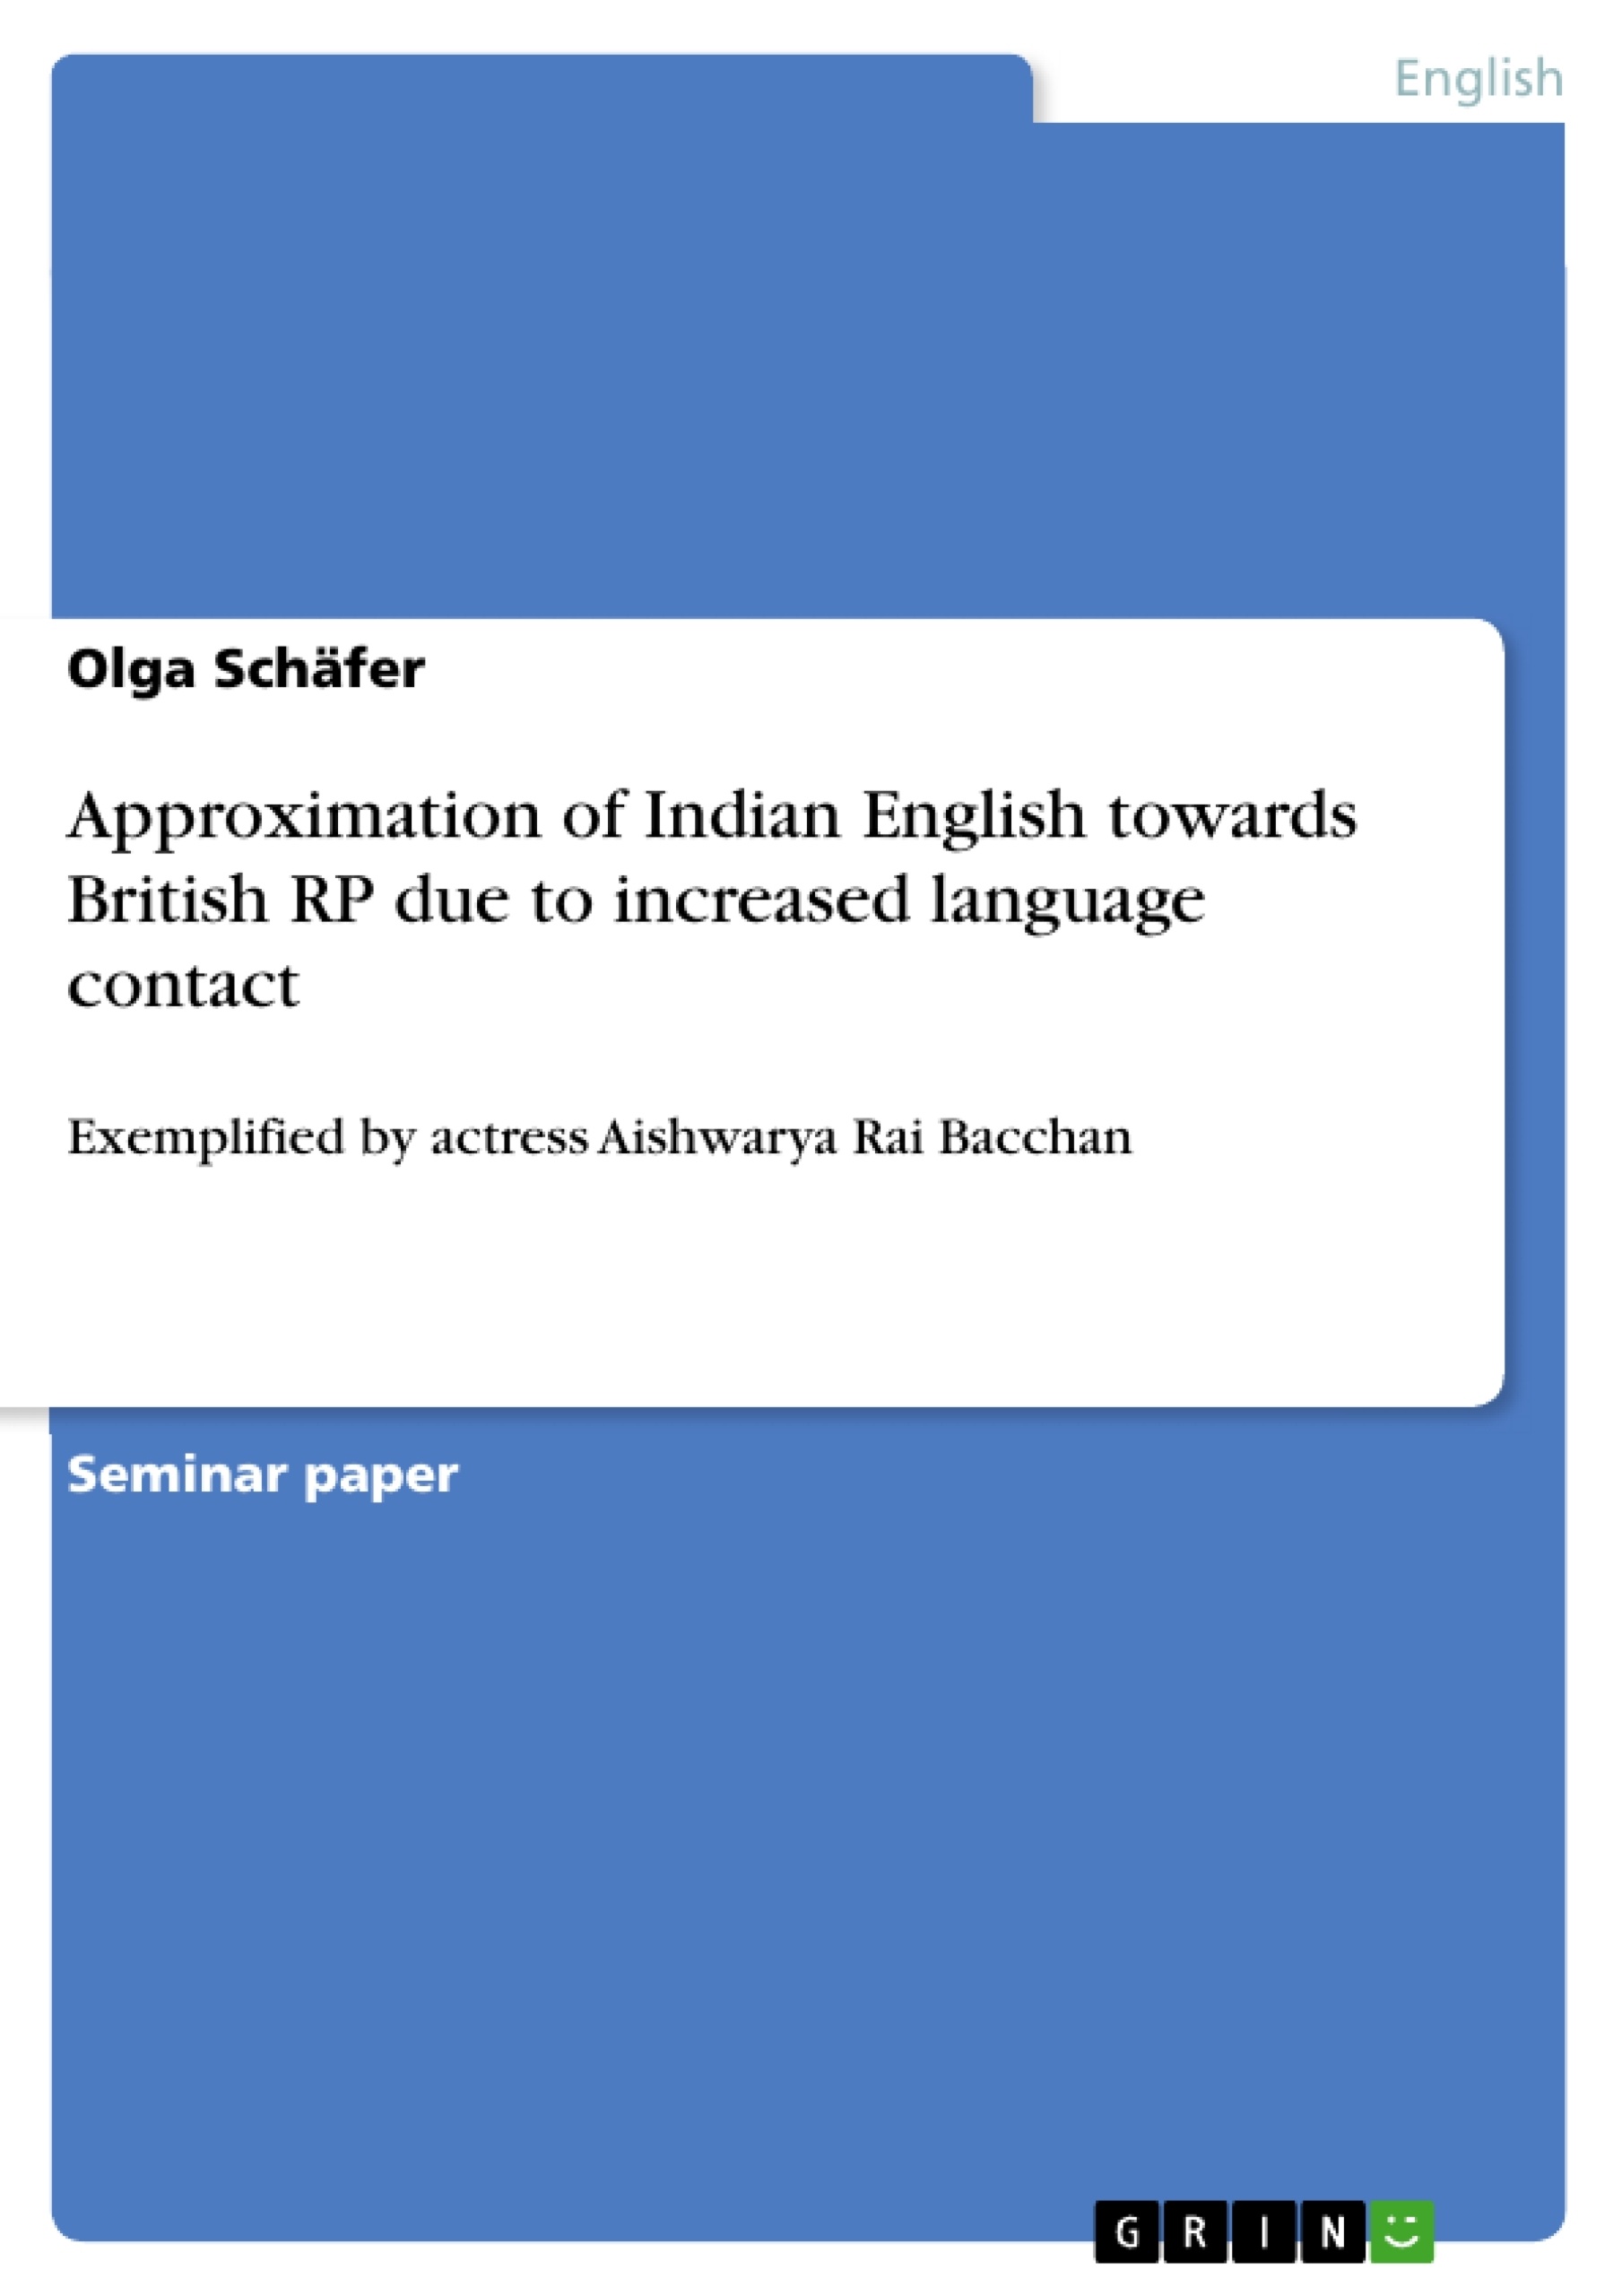 Titre: Approximation of Indian English towards British RP due to increased language contact